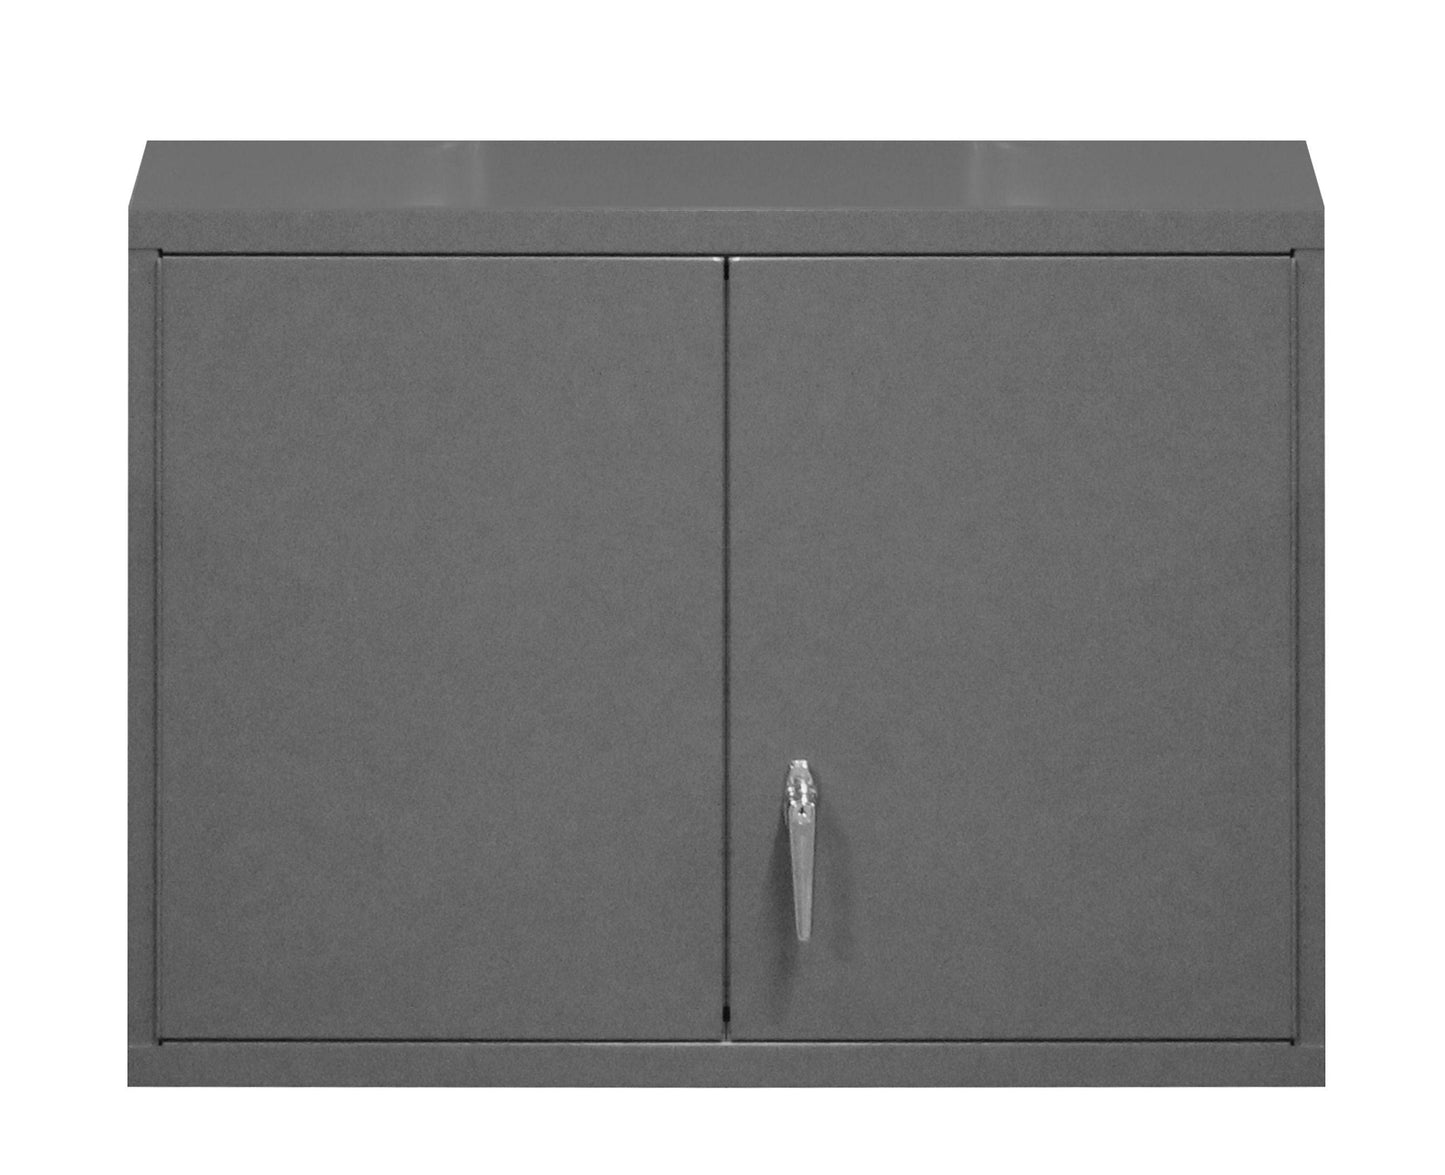 Wall Mounted Storage Cabinet, 3 Shelves 30" to 36" Wide - Durham